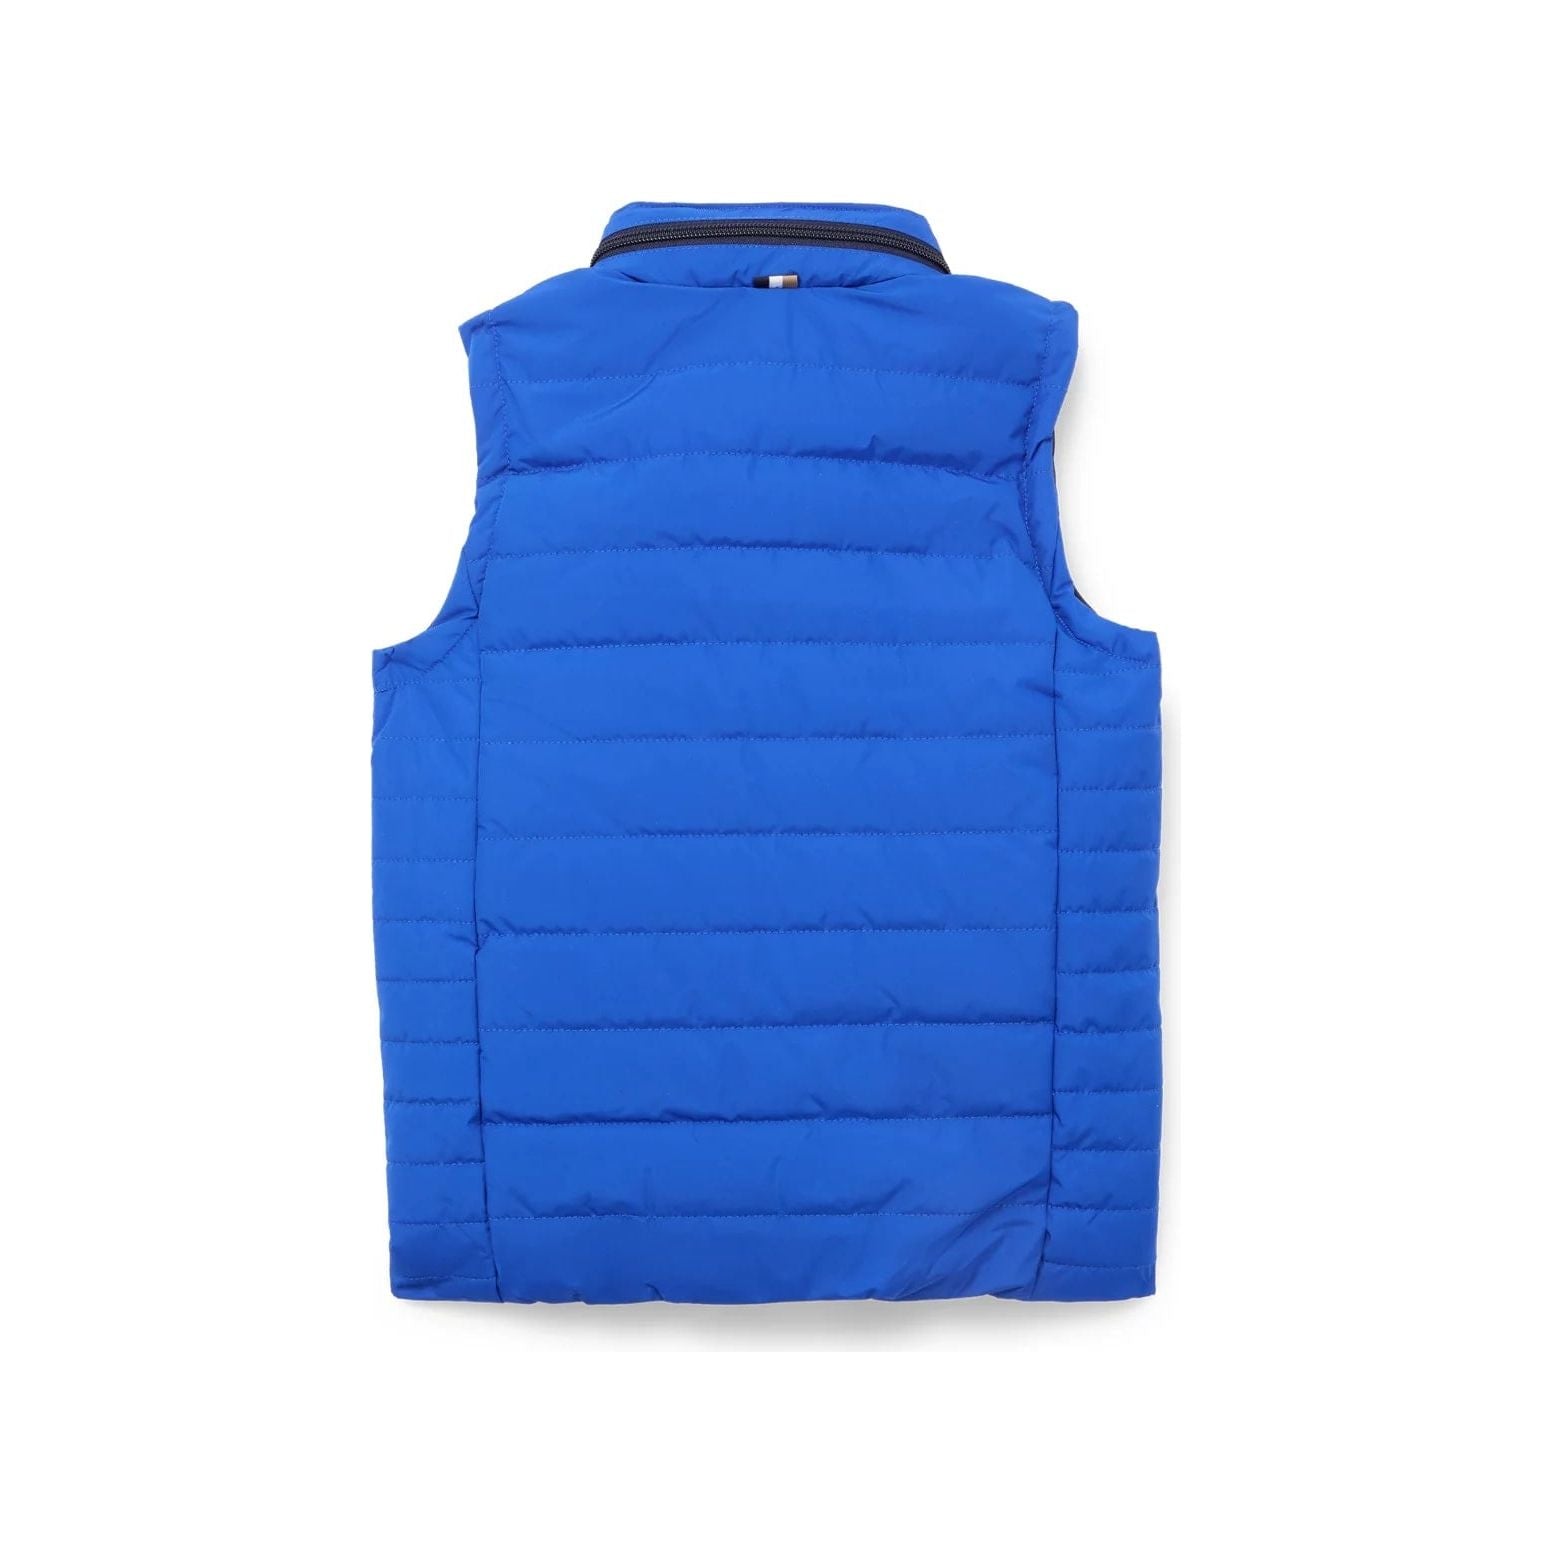 BOSS KIDS' GILET WITH PRINTED LOGO AND PACKABLE HOOD - Yooto